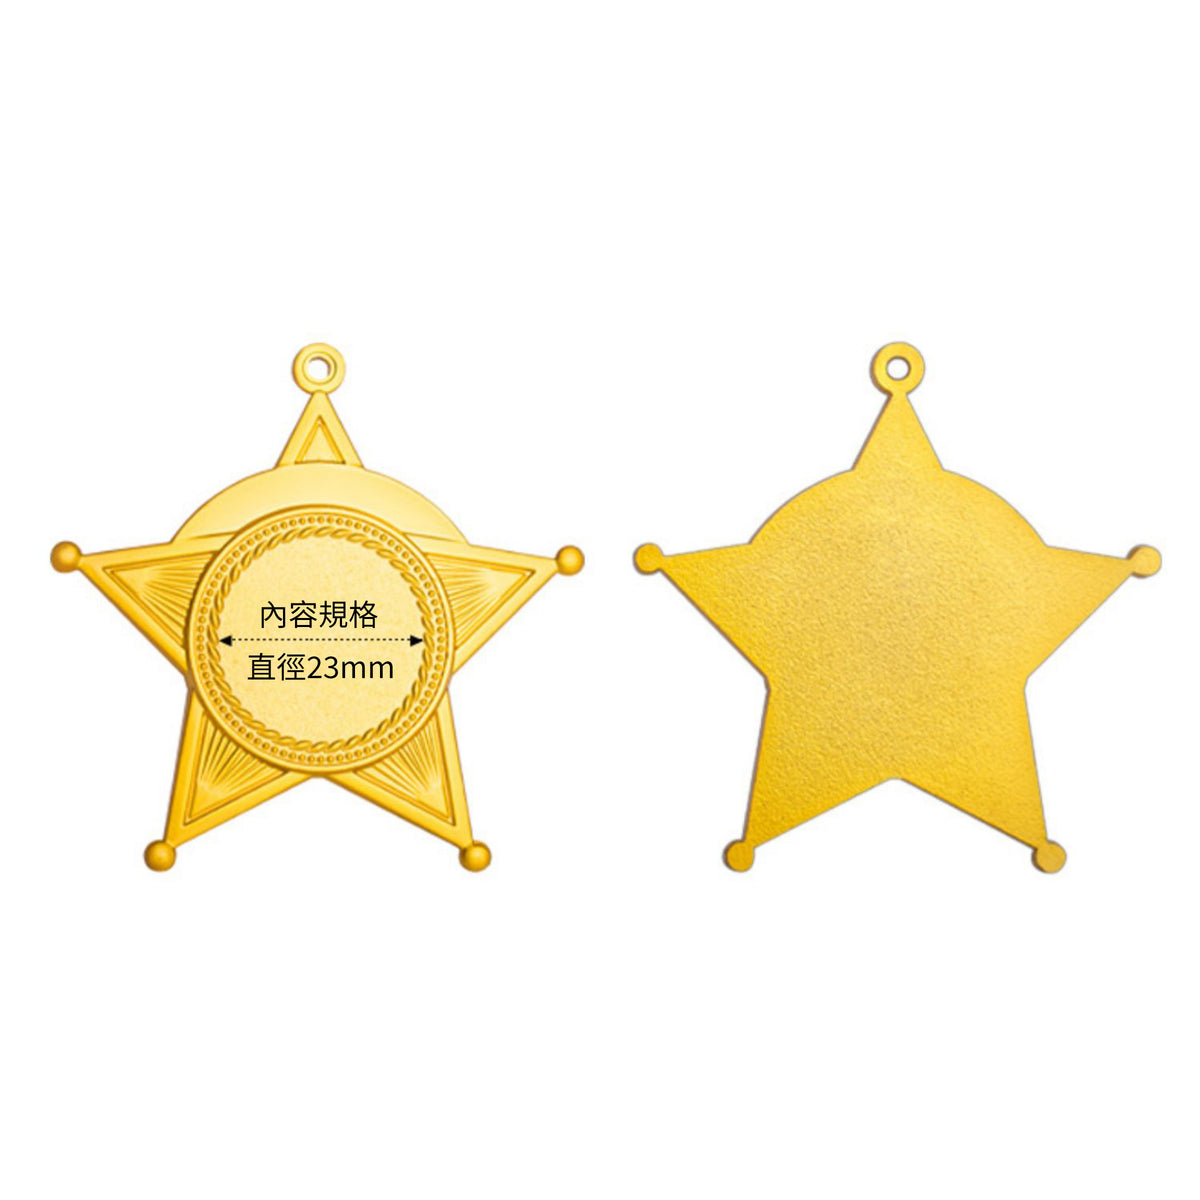 Creative Children And Youth Medals | 通用五角星獎牌訂製 運動會掛牌榮譽獎章